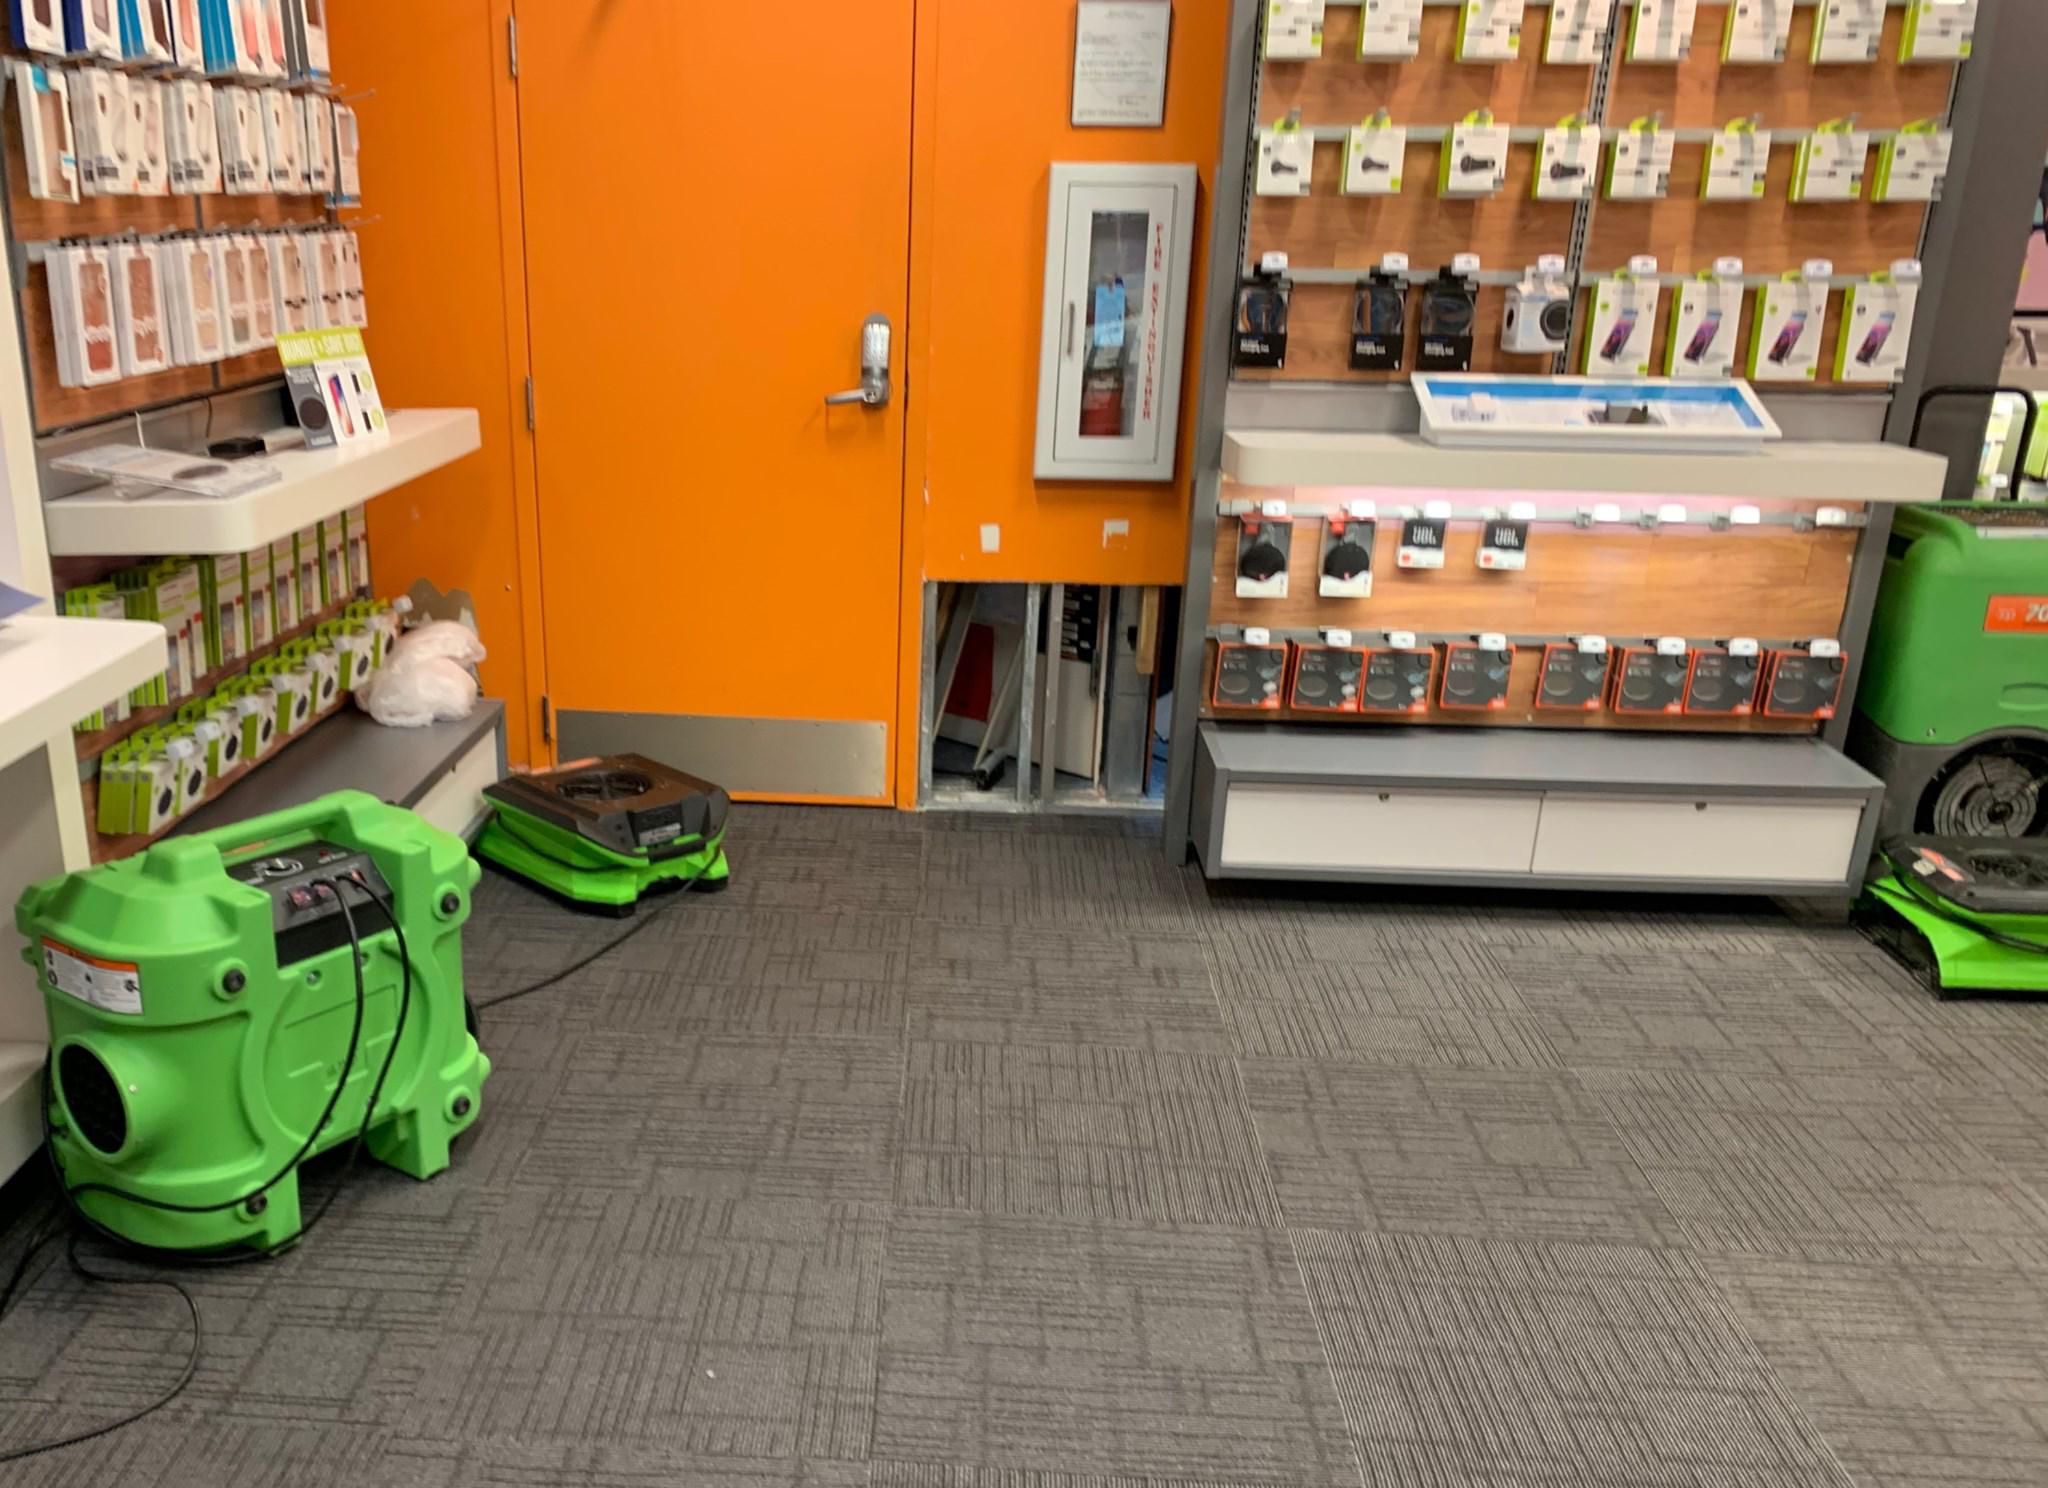 SERVPRO of Northwest St.Louis County is "faster to any size disaster." Water damage restoration is just one of our many specialties. We had AT&T getting back to business in no time!